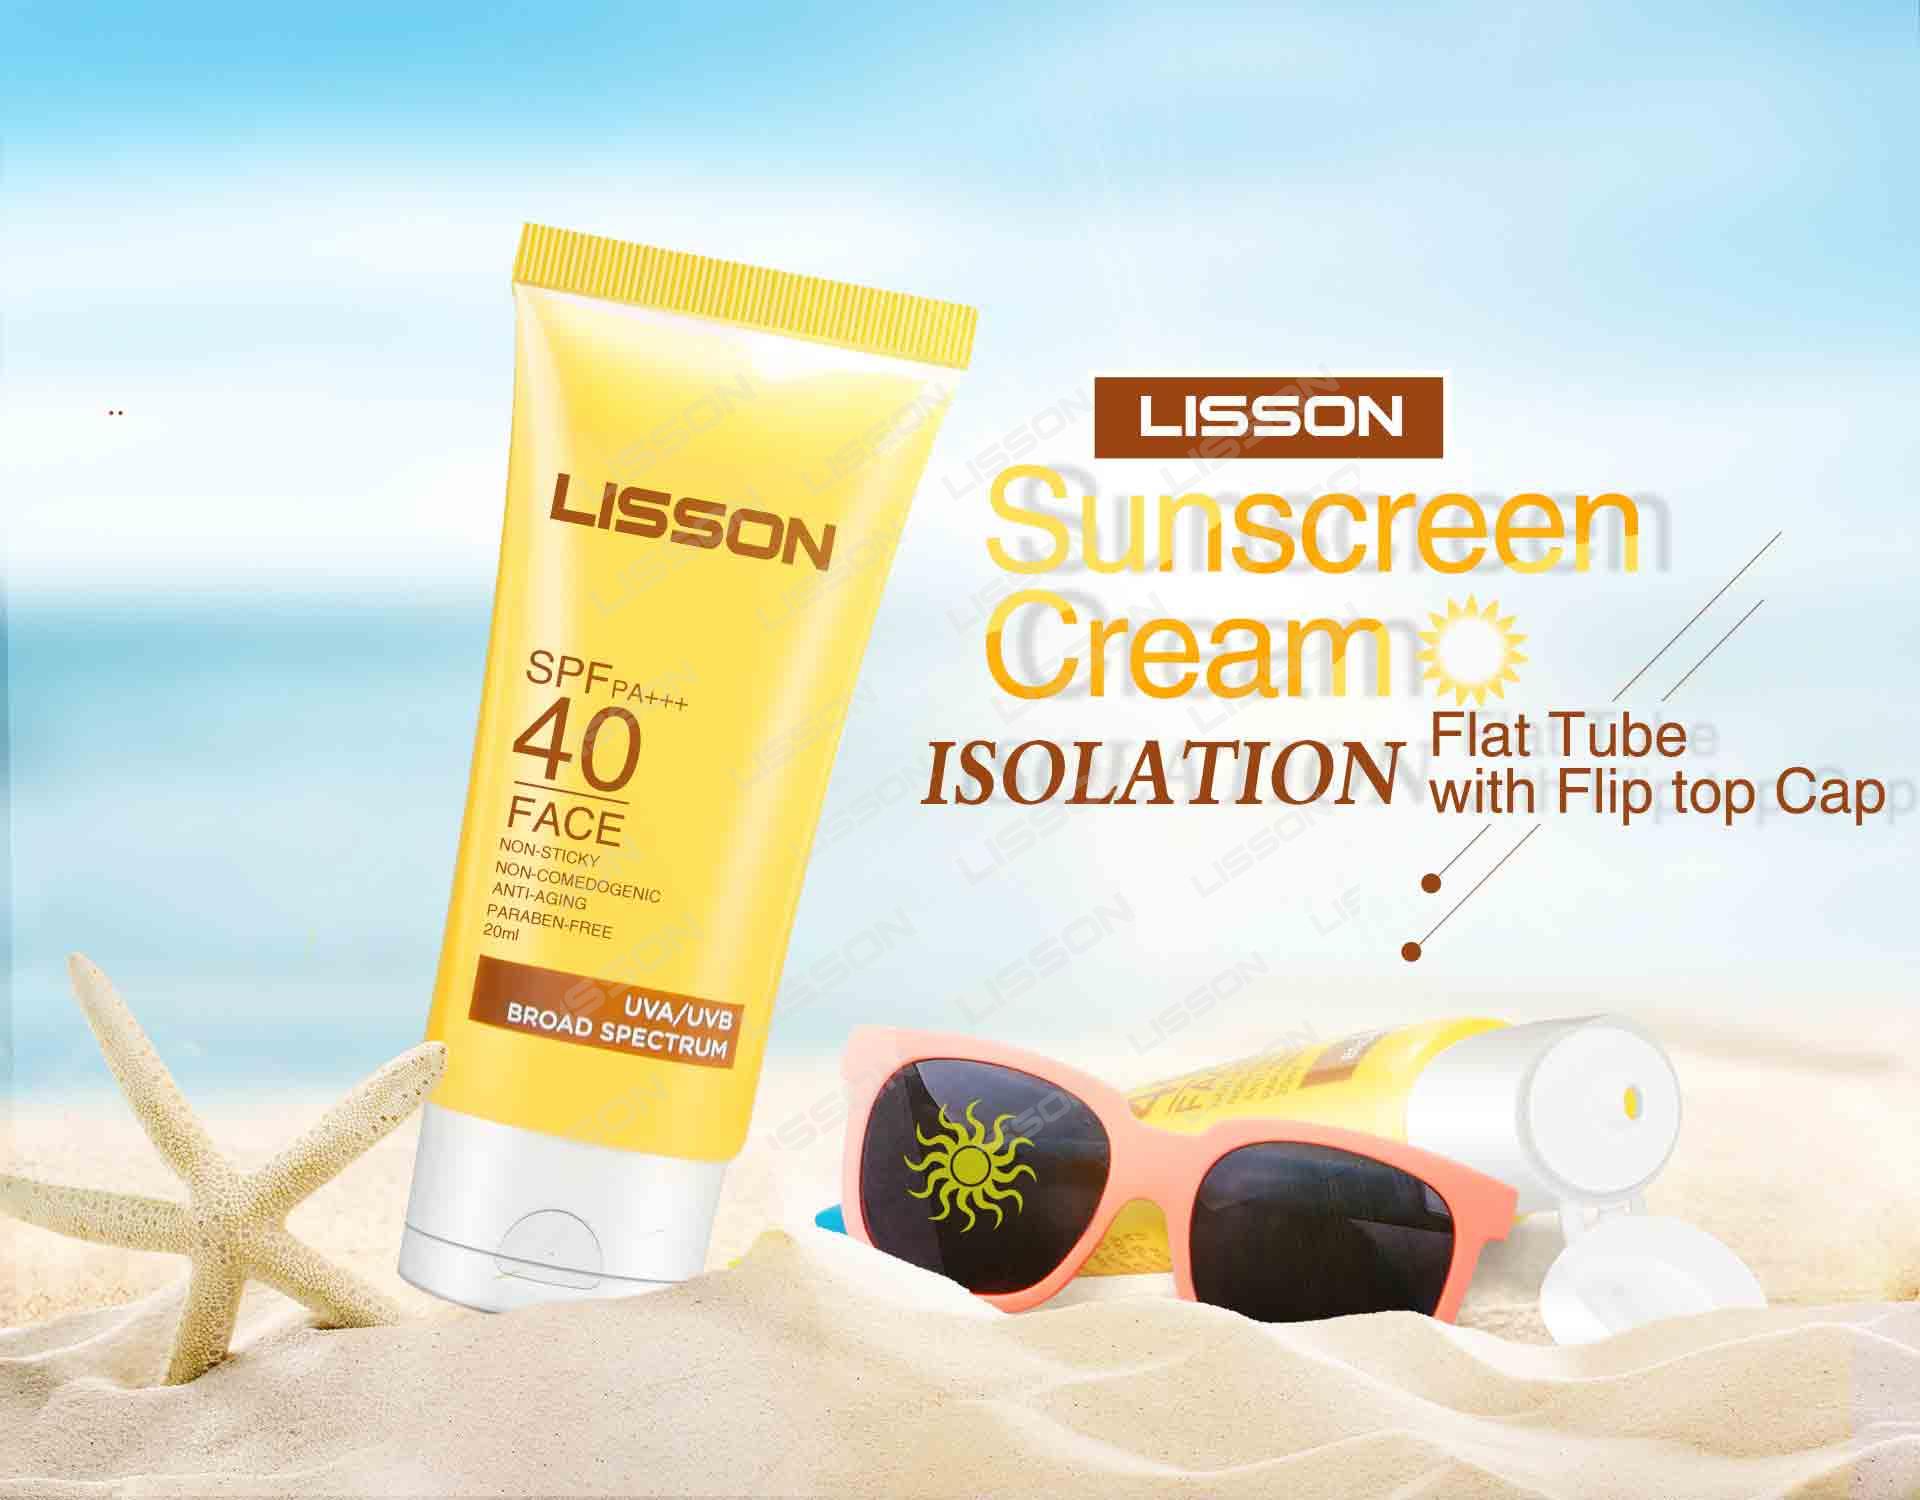 Supply Flat Tube with Flip top Cap for Sunscreen Cream